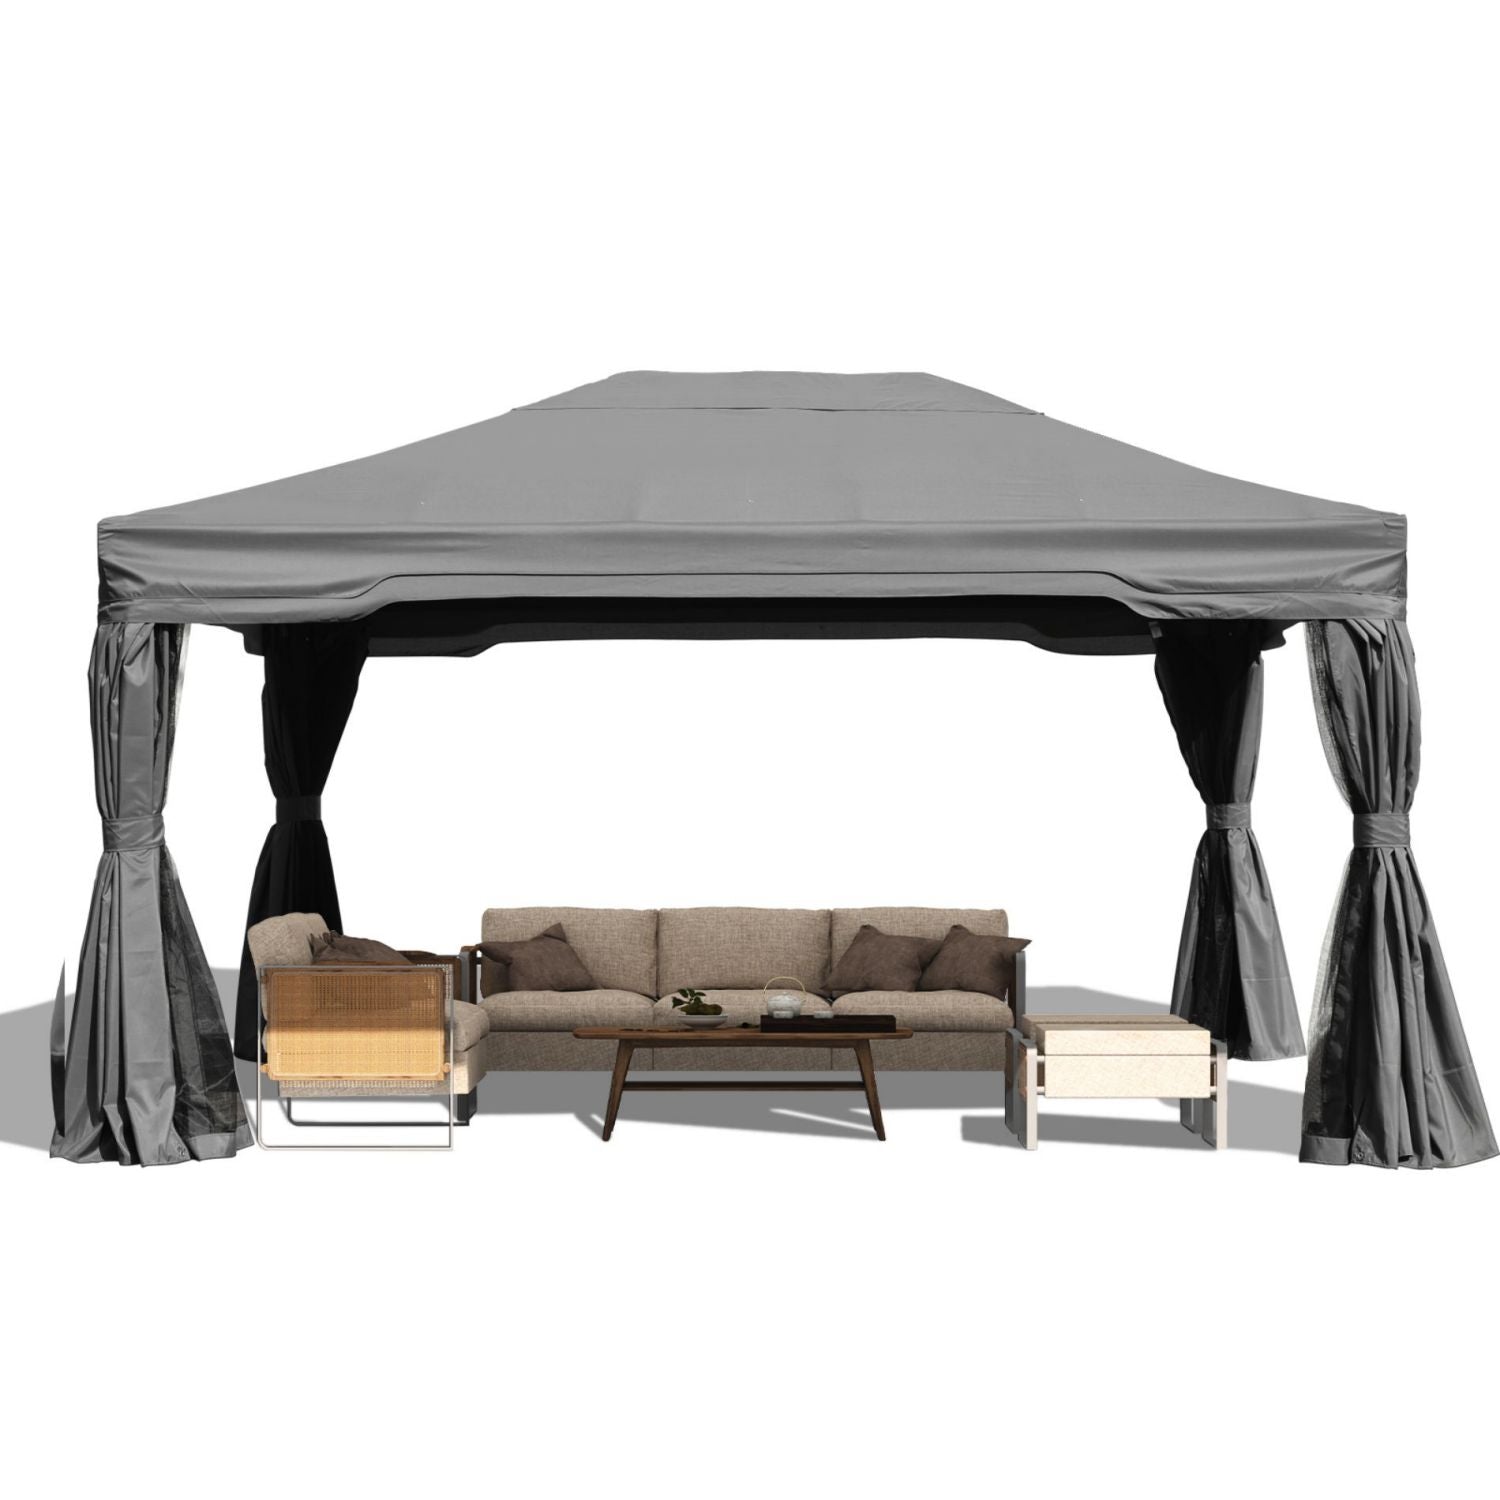 12 x 12 ft. Outdoor Gazebo Tent Canopy Shelter, Aluminum Frame with Privacy Curtain and Netting Gazebo Aoodor LLC 12' x 16' x 9' Gray 